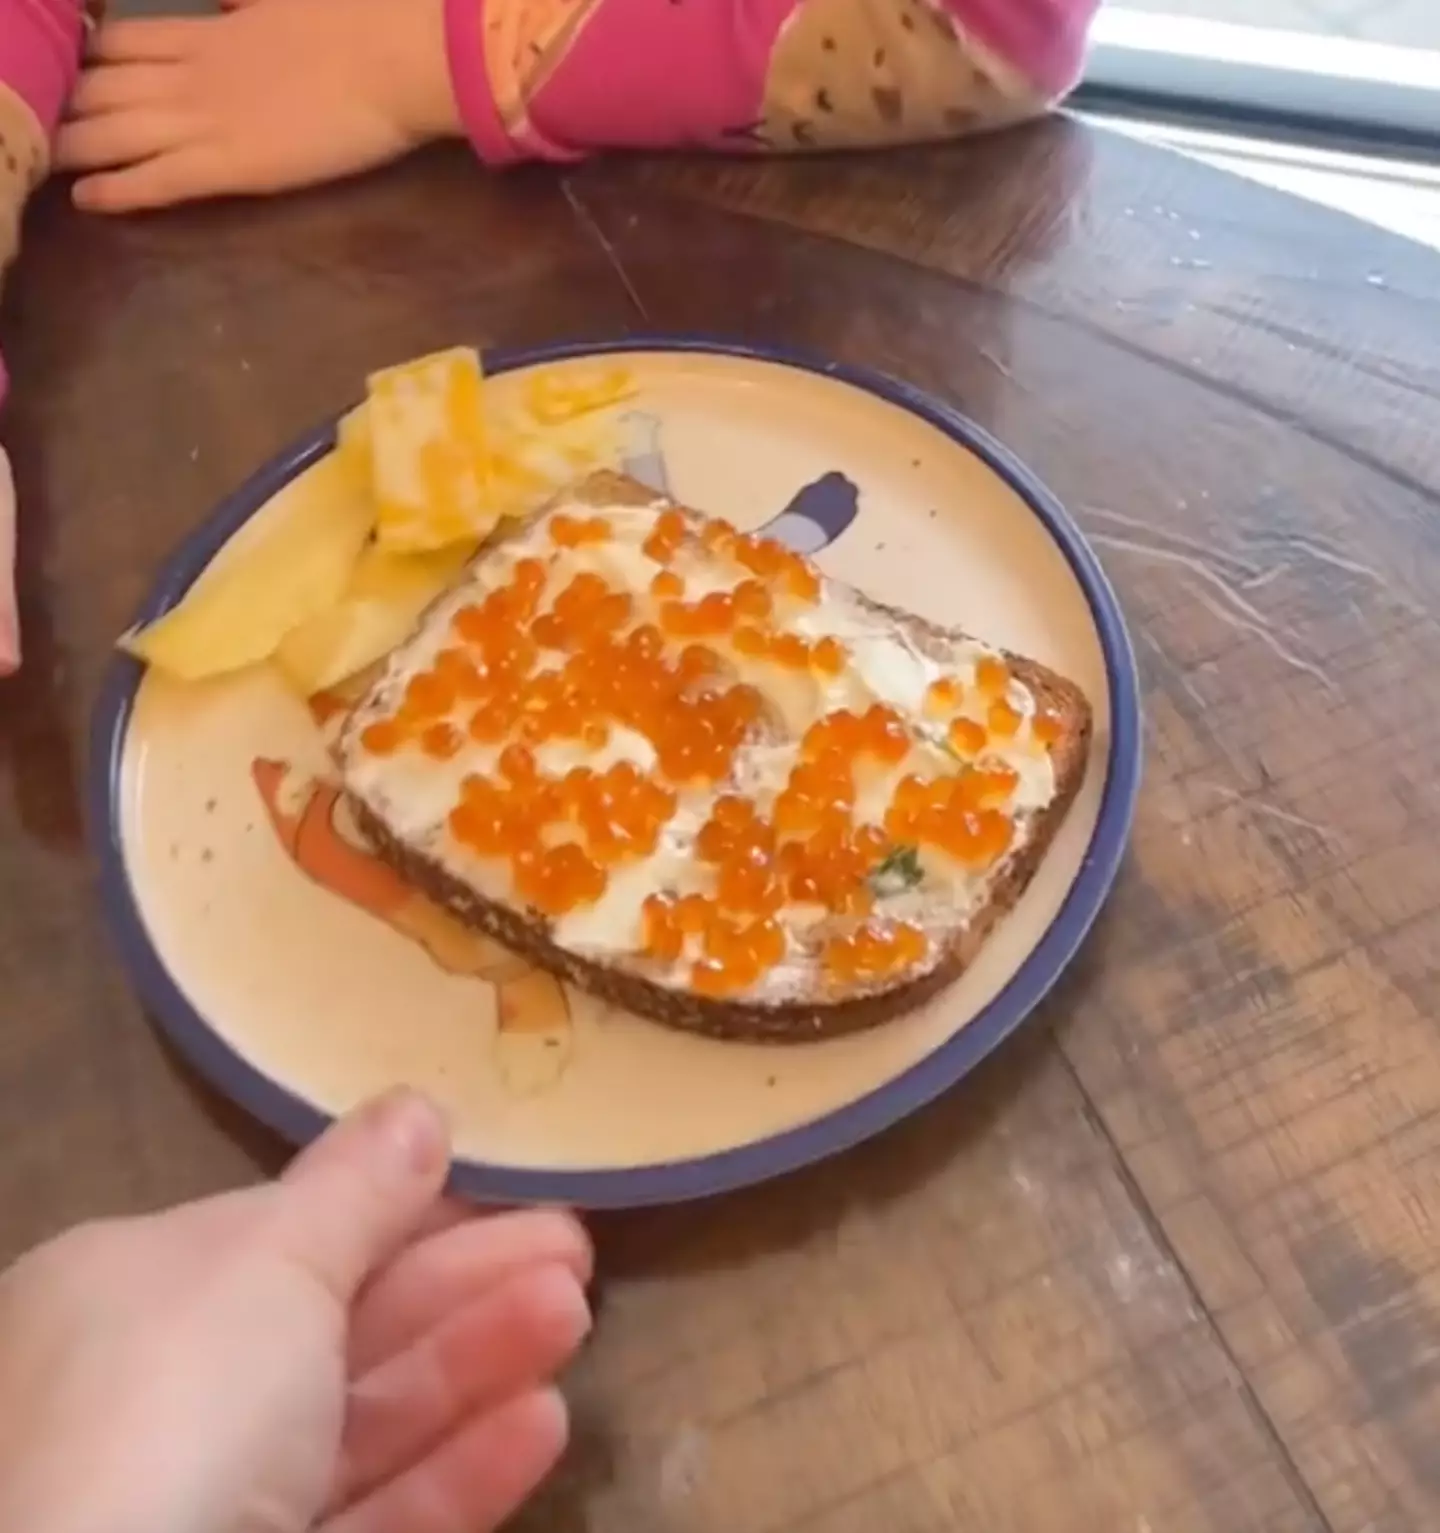 The kids asked for caviar with scallion cream cheese on bread.